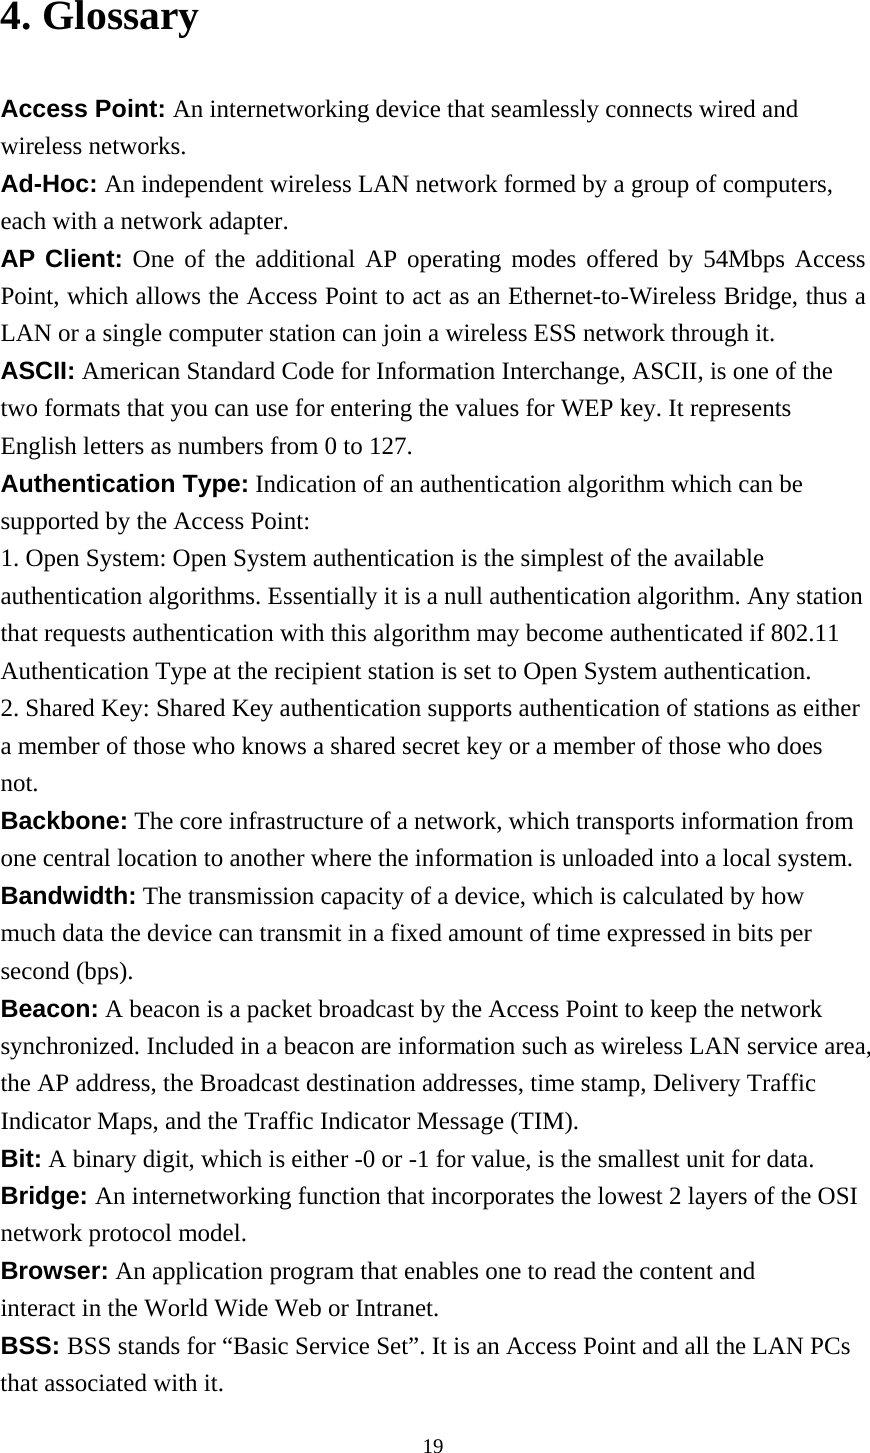  194. Glossary Access Point: An internetworking device that seamlessly connects wired and wireless networks. Ad-Hoc: An independent wireless LAN network formed by a group of computers, each with a network adapter. AP Client: One of the additional AP operating modes offered by 54Mbps Access Point, which allows the Access Point to act as an Ethernet-to-Wireless Bridge, thus a LAN or a single computer station can join a wireless ESS network through it. ASCII: American Standard Code for Information Interchange, ASCII, is one of the two formats that you can use for entering the values for WEP key. It represents English letters as numbers from 0 to 127. Authentication Type: Indication of an authentication algorithm which can be supported by the Access Point: 1. Open System: Open System authentication is the simplest of the available authentication algorithms. Essentially it is a null authentication algorithm. Any station that requests authentication with this algorithm may become authenticated if 802.11 Authentication Type at the recipient station is set to Open System authentication. 2. Shared Key: Shared Key authentication supports authentication of stations as either a member of those who knows a shared secret key or a member of those who does not. Backbone: The core infrastructure of a network, which transports information from one central location to another where the information is unloaded into a local system. Bandwidth: The transmission capacity of a device, which is calculated by how much data the device can transmit in a fixed amount of time expressed in bits per second (bps). Beacon: A beacon is a packet broadcast by the Access Point to keep the network synchronized. Included in a beacon are information such as wireless LAN service area, the AP address, the Broadcast destination addresses, time stamp, Delivery Traffic Indicator Maps, and the Traffic Indicator Message (TIM). Bit: A binary digit, which is either -0 or -1 for value, is the smallest unit for data. Bridge: An internetworking function that incorporates the lowest 2 layers of the OSI network protocol model. Browser: An application program that enables one to read the content and interact in the World Wide Web or Intranet. BSS: BSS stands for “Basic Service Set”. It is an Access Point and all the LAN PCs that associated with it. 